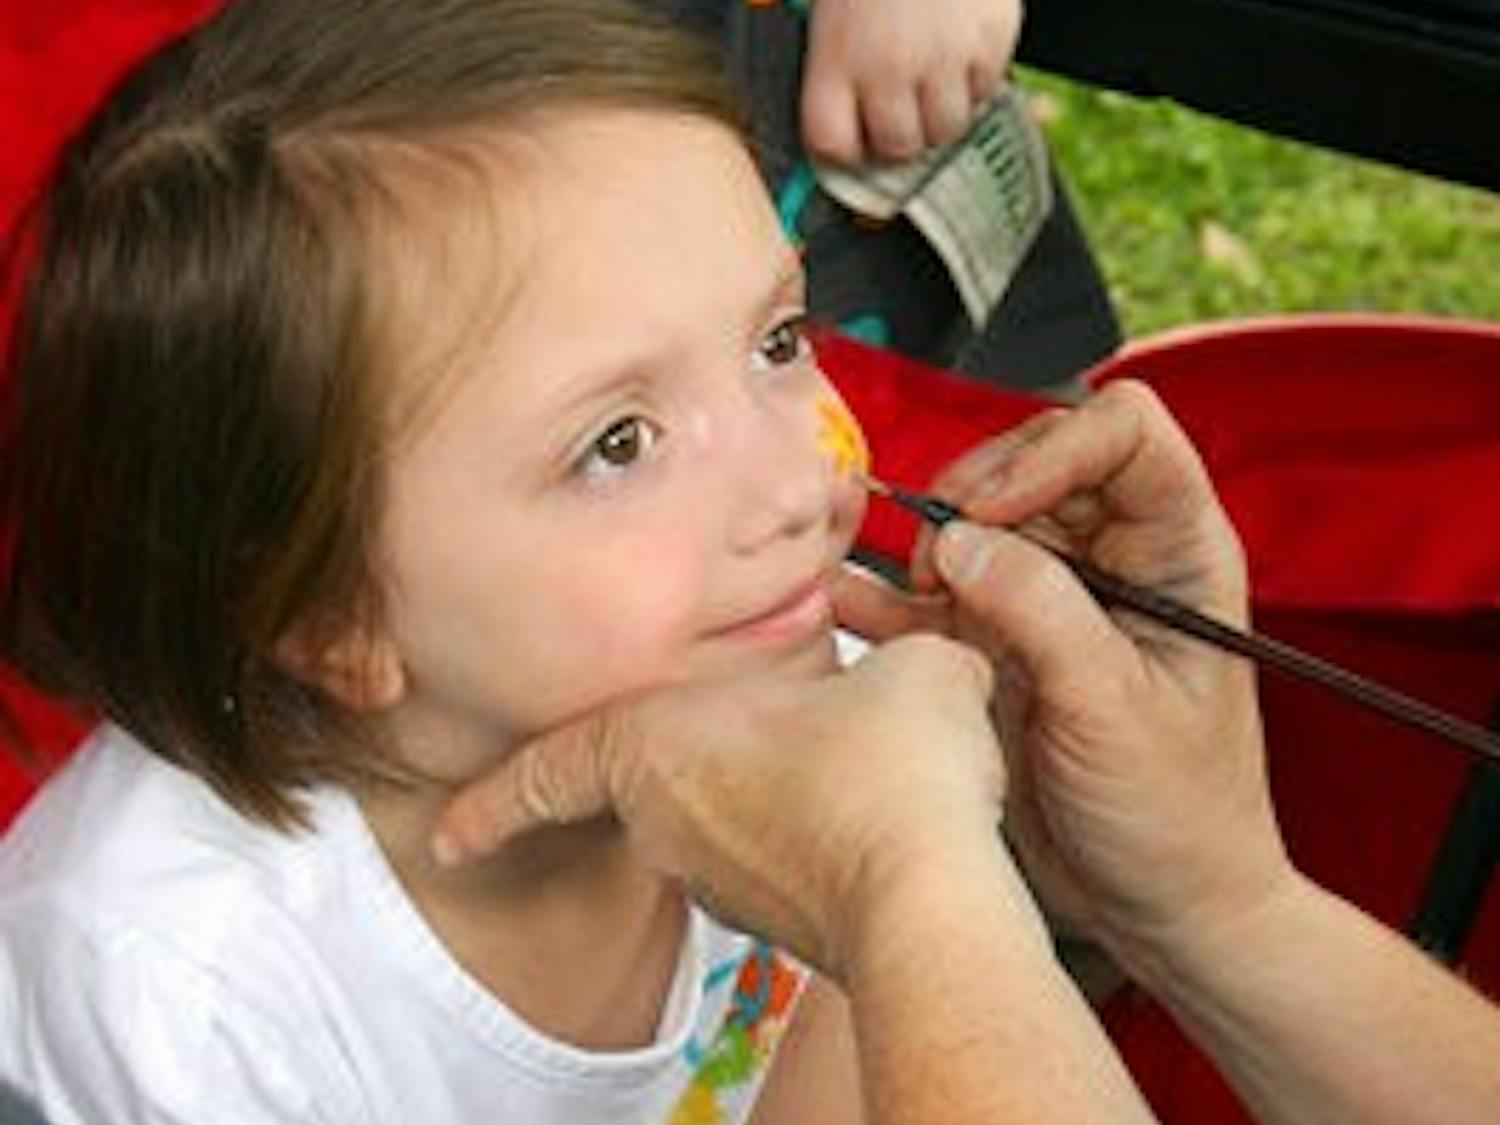 Ansley, 4, from the Opelika area, gets a ladybug painted on her face at the Garden in the Park Festival. (Rebekah Weaver/ASSISTANT PHOTO EDITOR)